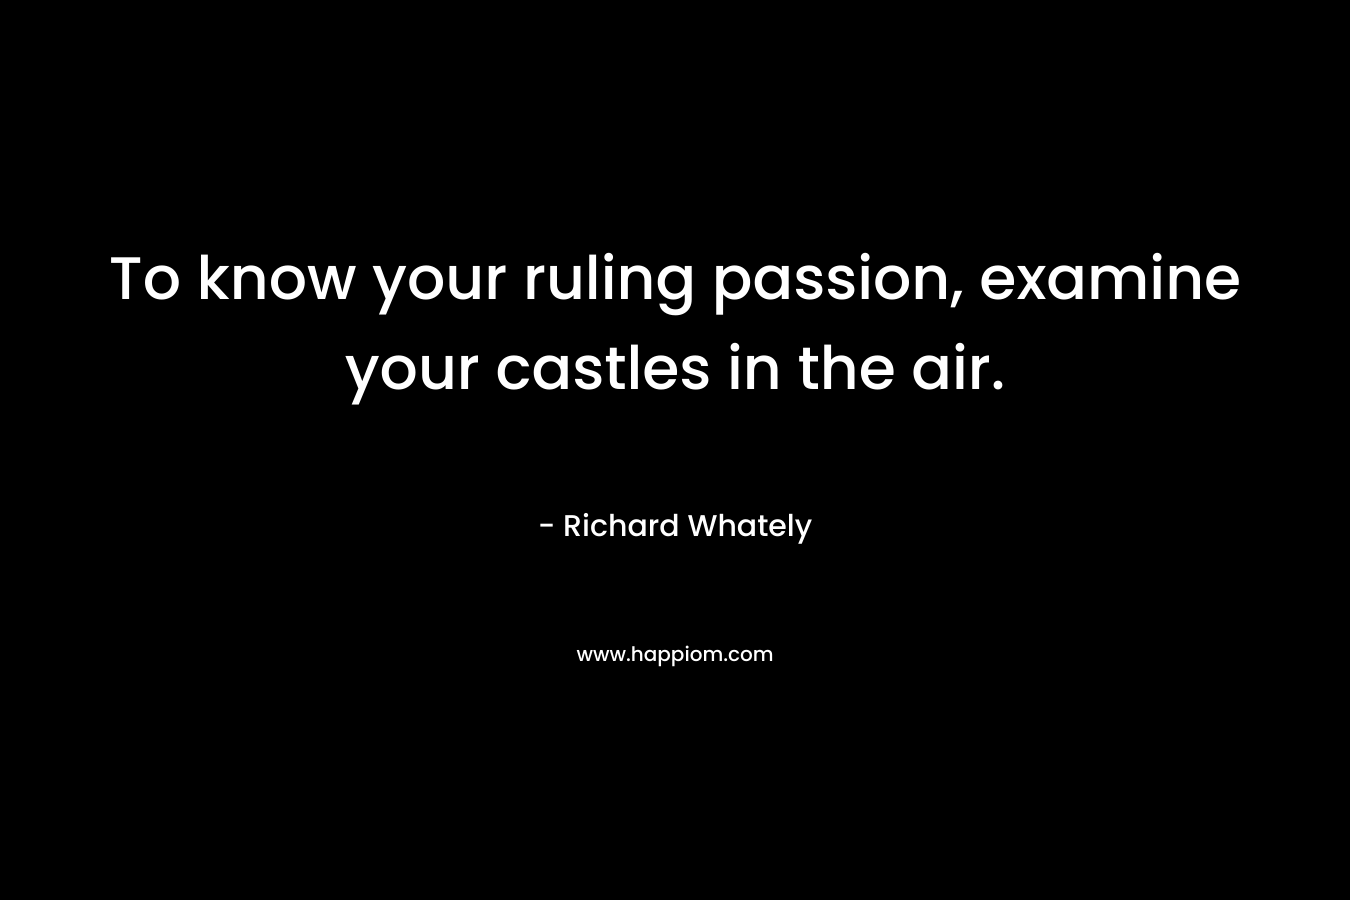 To know your ruling passion, examine your castles in the air. – Richard Whately